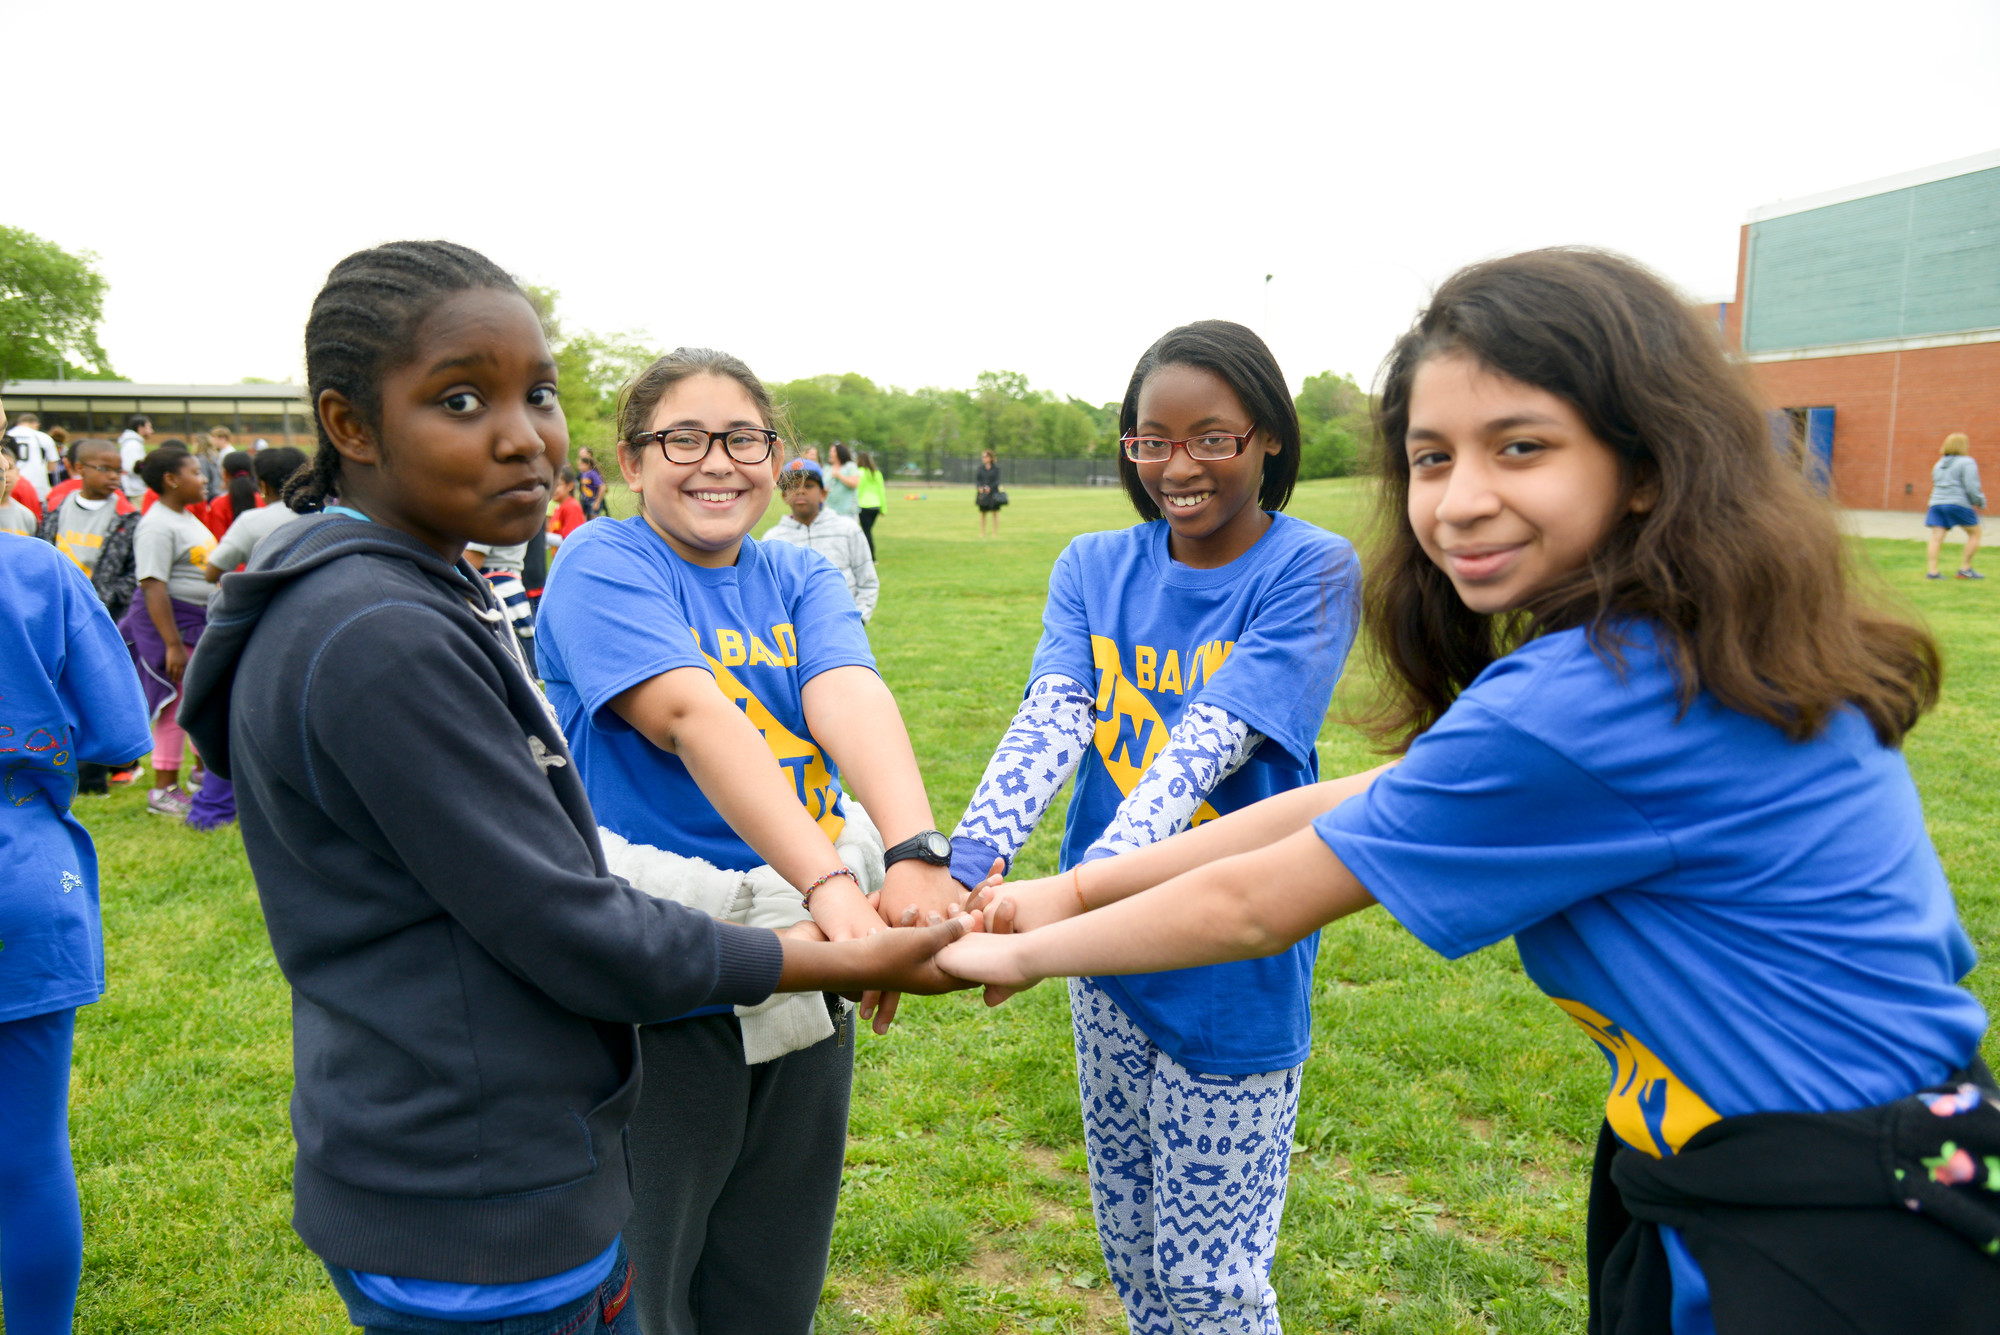 Baldwin fifth graders took part in Unity Day at Baldwin High School on May 21. From left were Danay Niles, Cynthia Williams, Heaven Blakey and Jacqueline Martinez